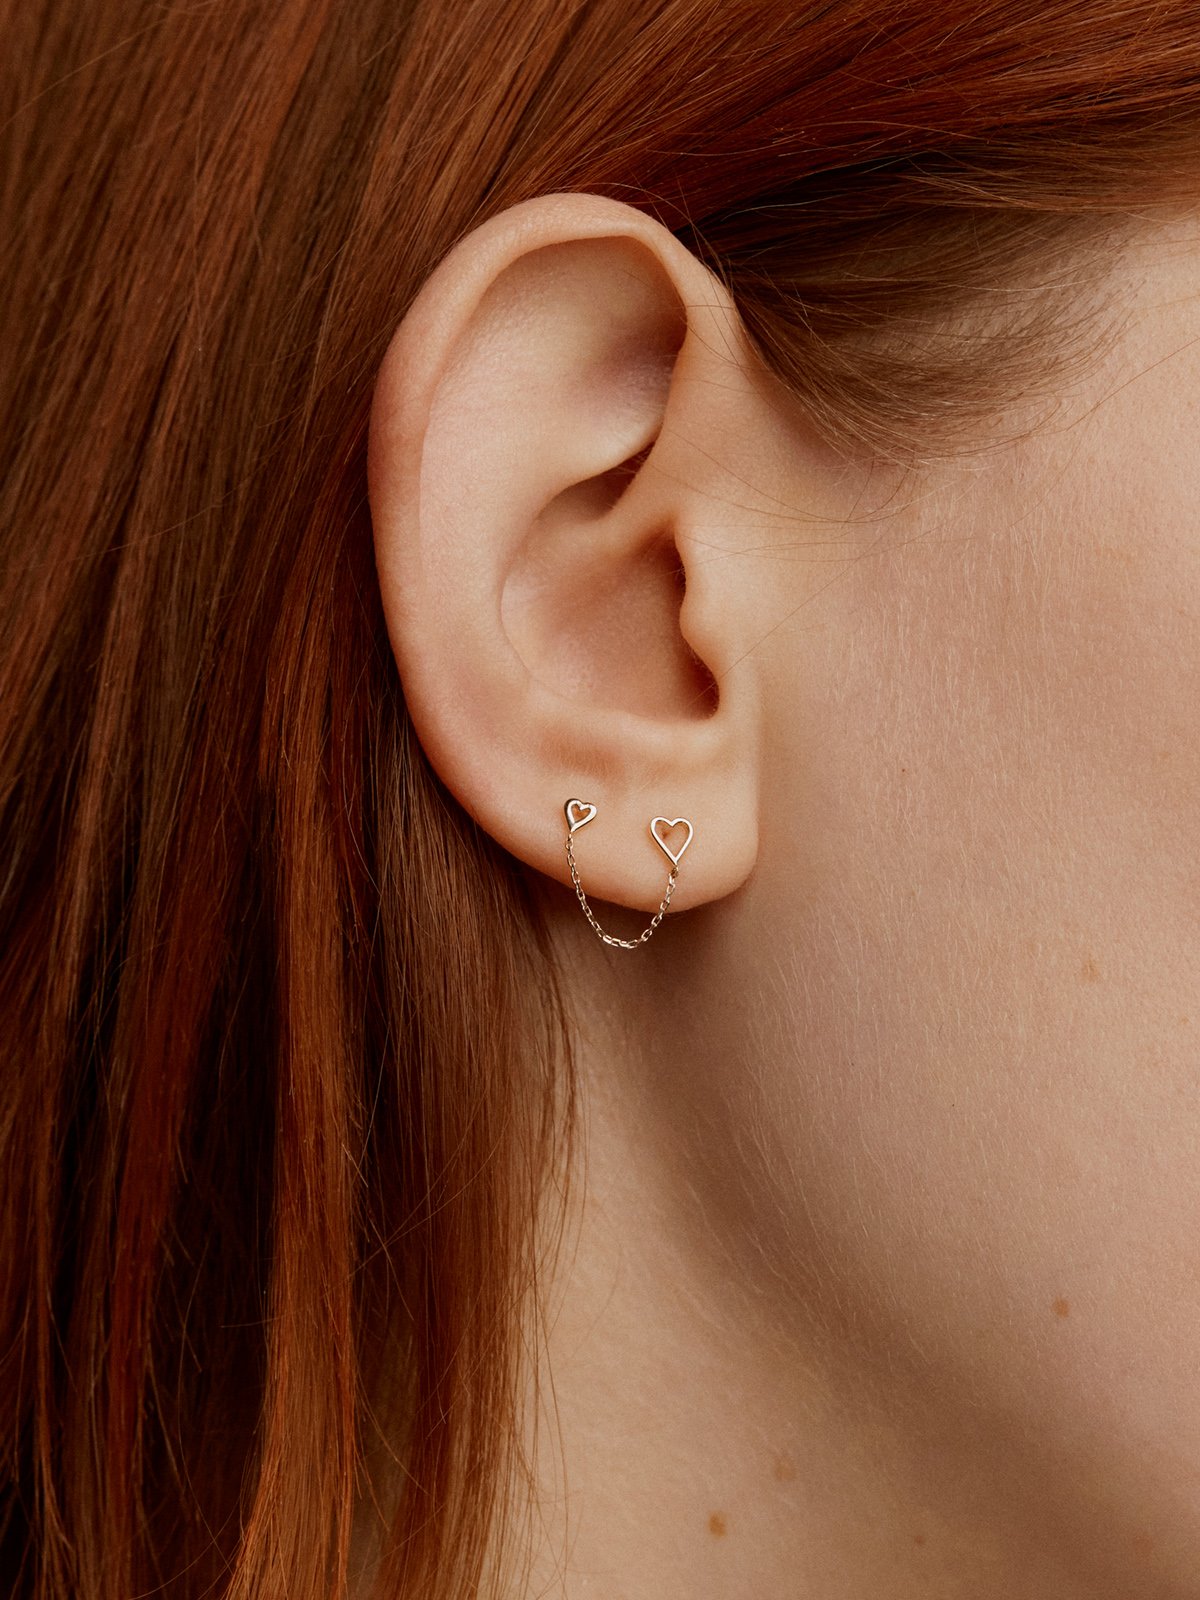 Individual 9K yellow gold climber earring with hearts.